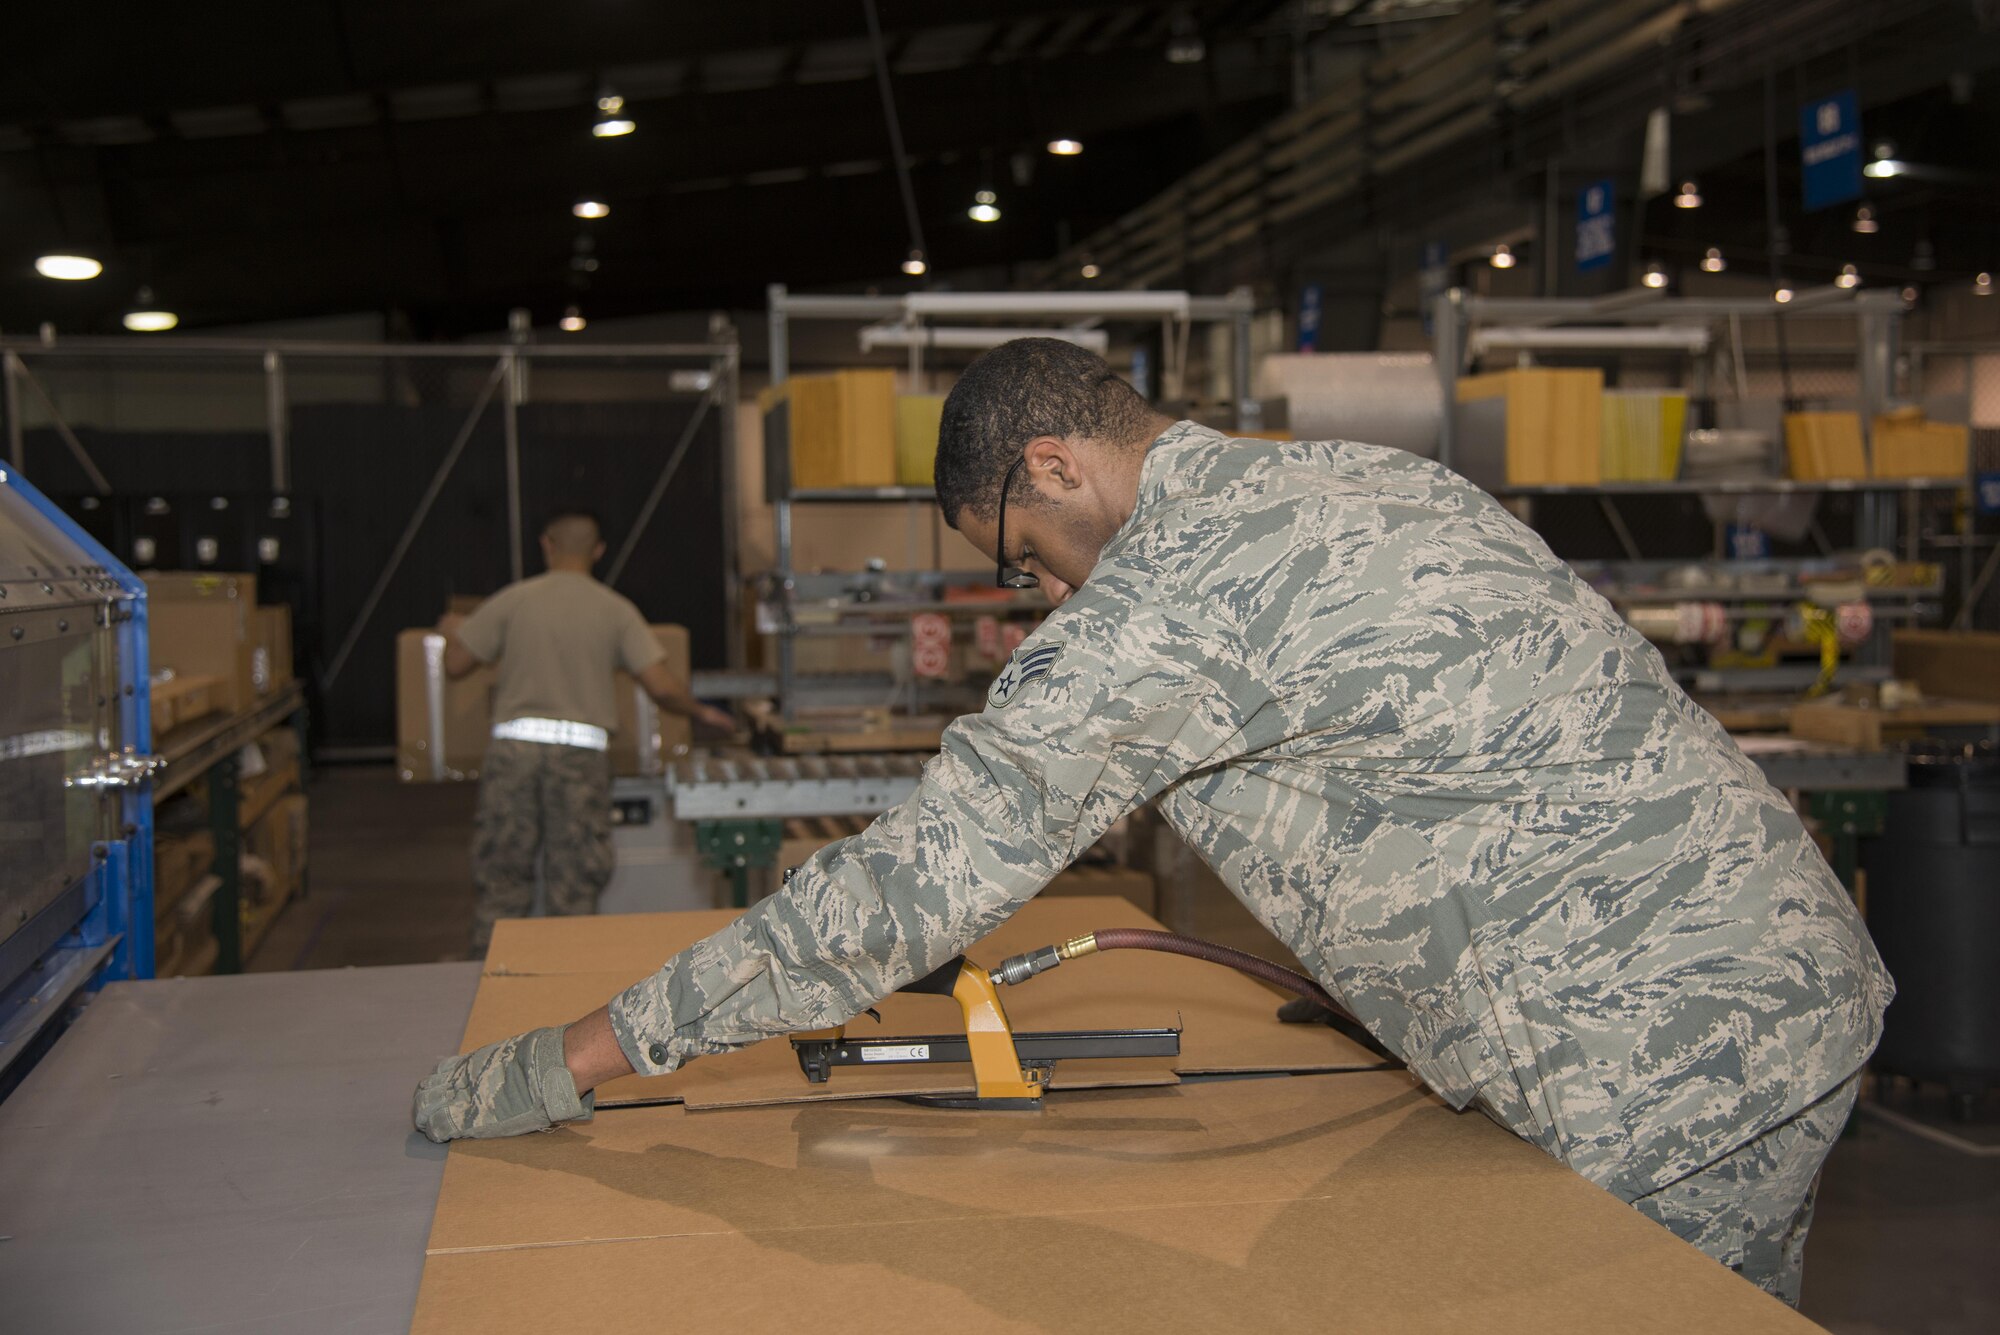 Senior Airman Gerard Pinckney, 436th Aerial Port Squadron traffic management specialist, staples two pieces of a cardboard box together Jan. 12, 2017, at the aerial port on Dover Air Force Base, Del. Using the box-making machine, Airmen can calculate dimensions and create a shipping box in only a few minutes. (U.S. Air Force photo by Senior Airman Aaron J. Jenne)